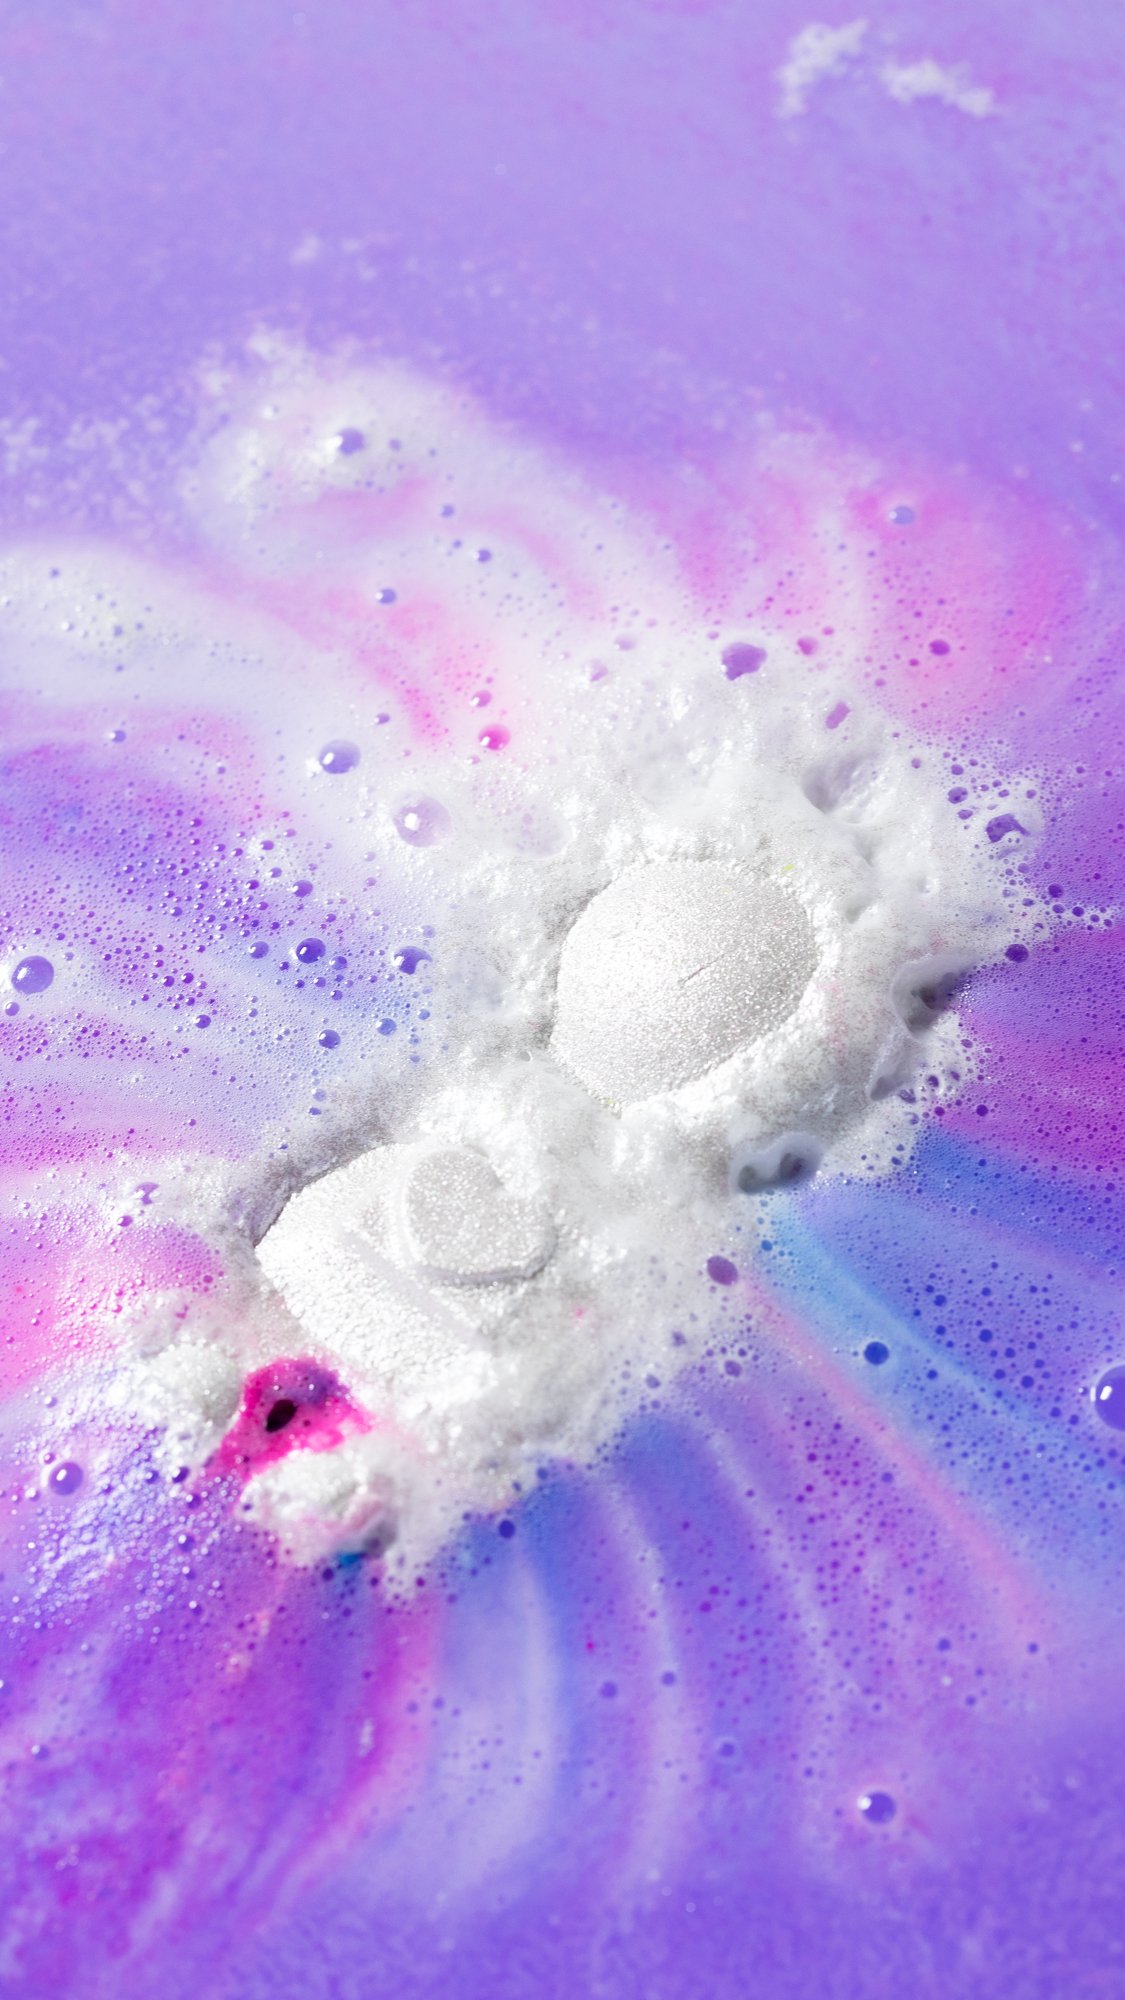 The Bath Bomb sits slightly sinking in the bath surrounded by foamy swirls of pink, purple and blue.